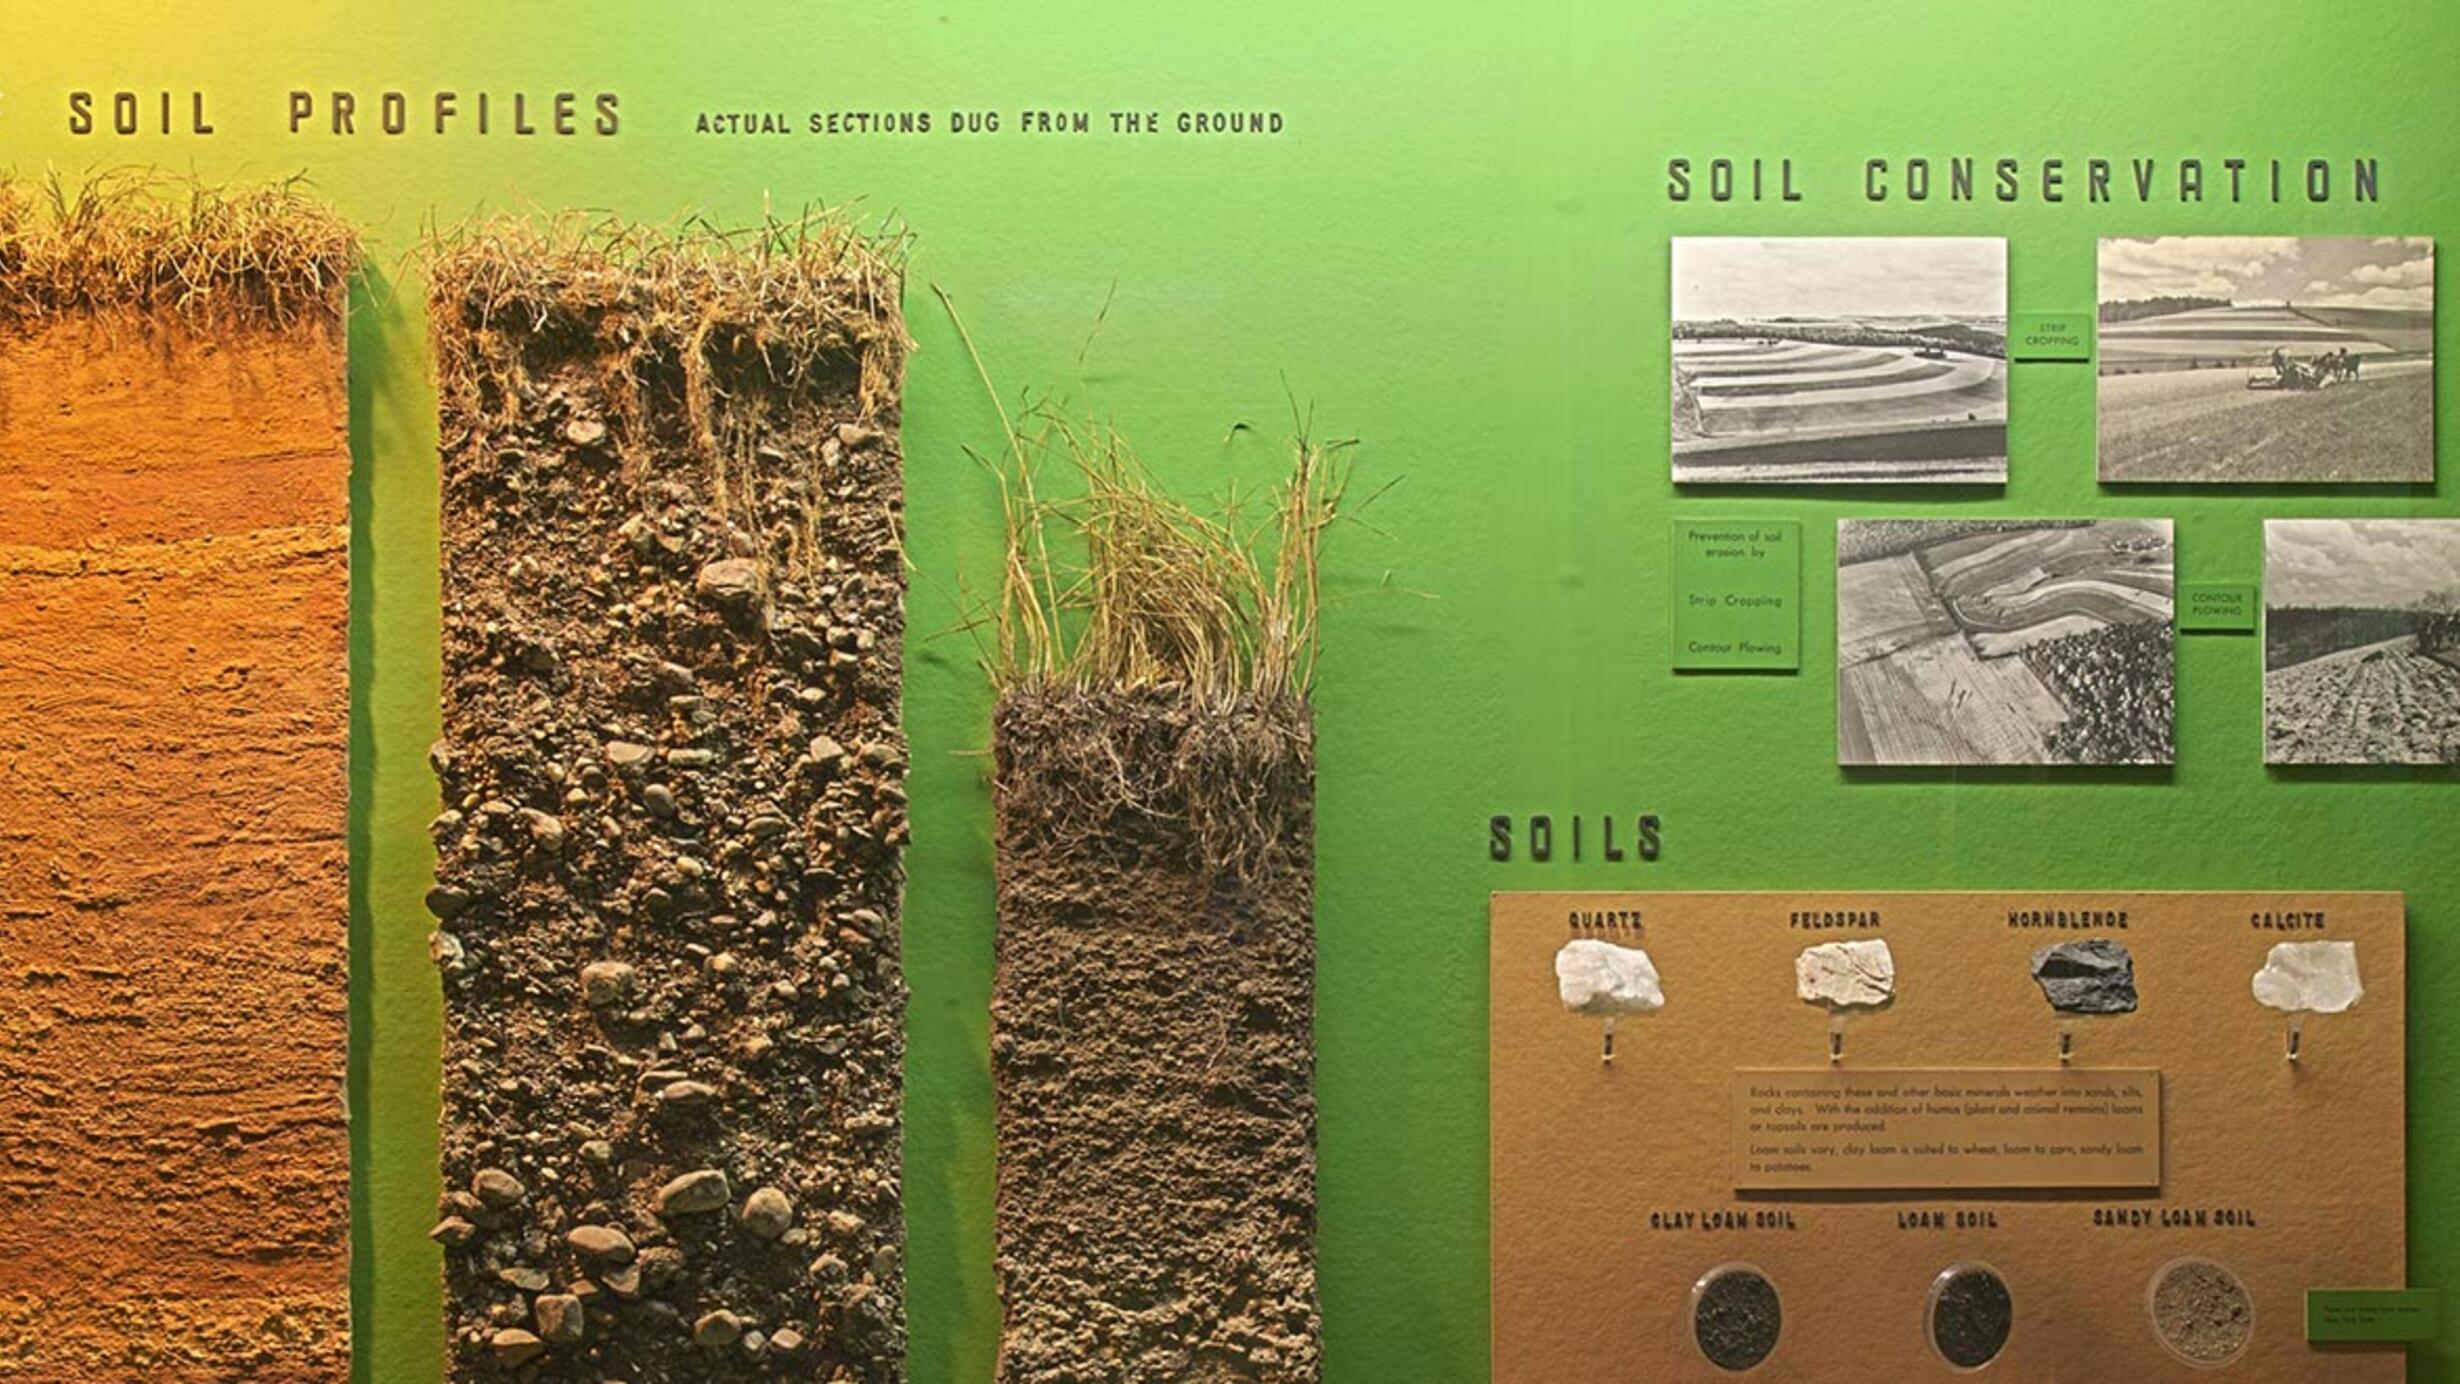 Exhibition case showing several soil profiles (actual sections dug from the soil), pictures about soil conservation and samples of soil.